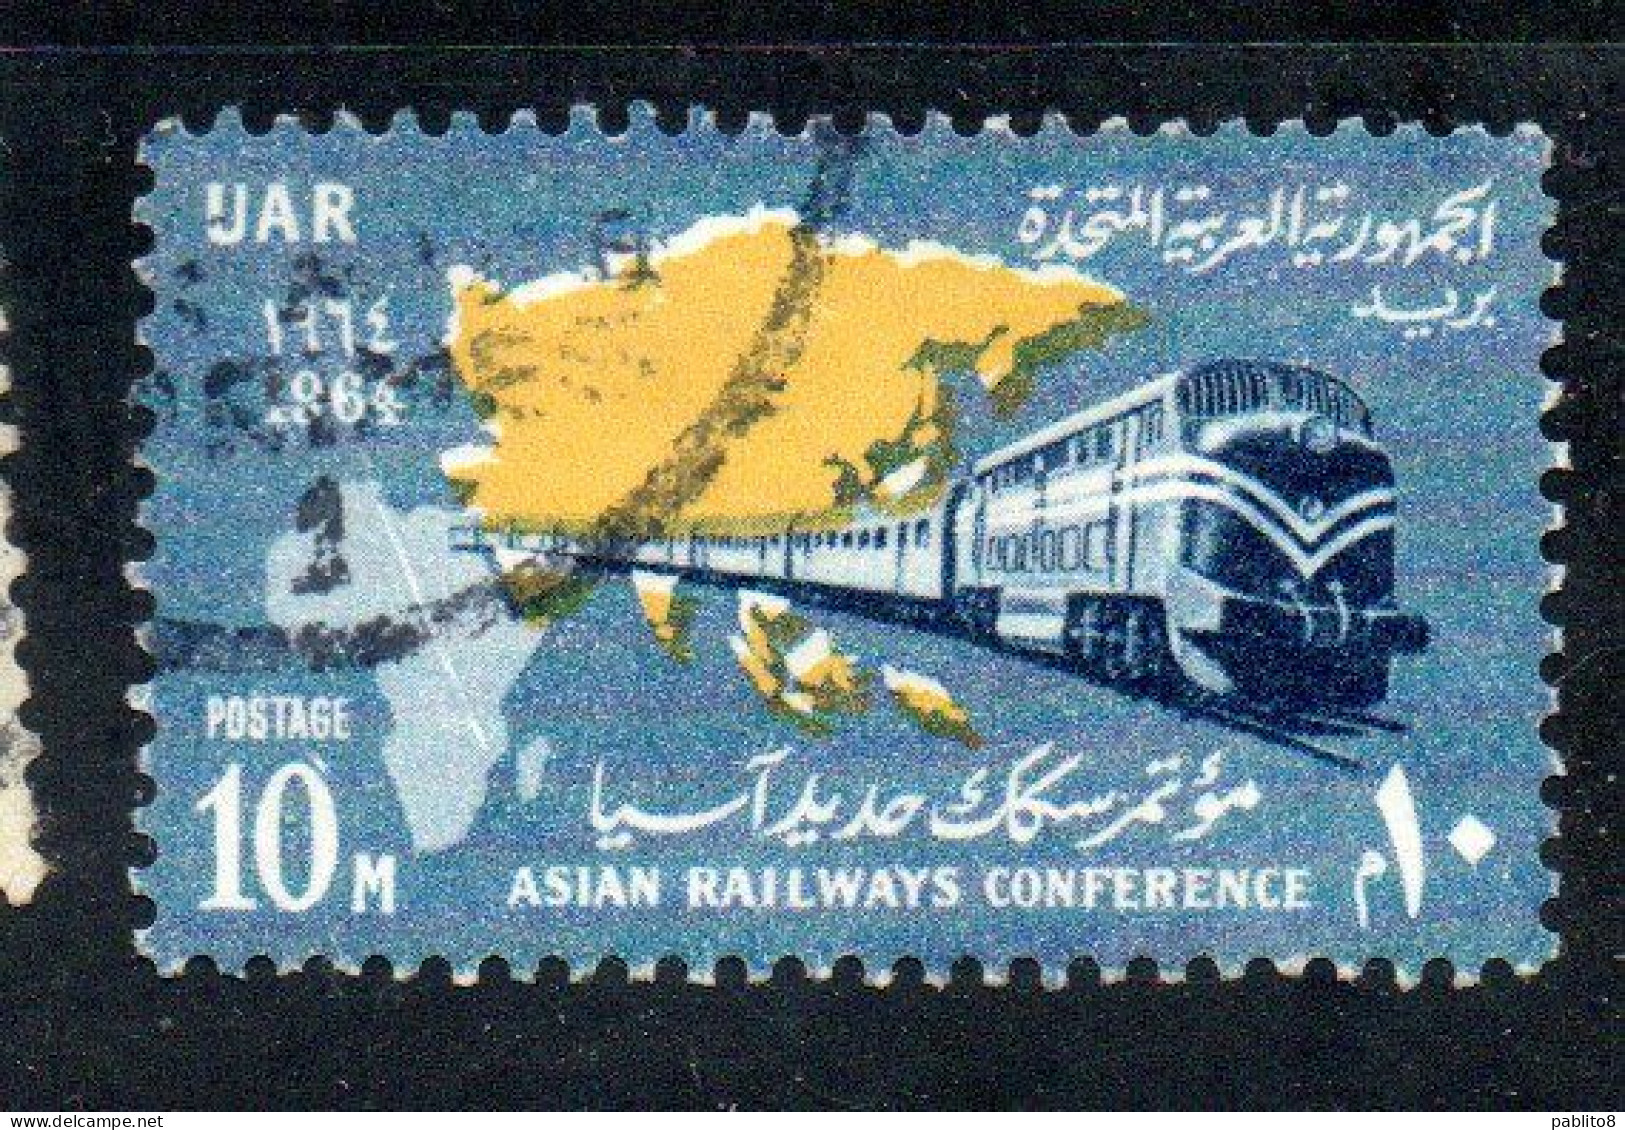 UAR EGYPT EGITTO 1964 ASIAN RAILWAY CONFERENCE CAIRO MAP AND TRAIN 10m USED USATO OBLITERE' - Used Stamps